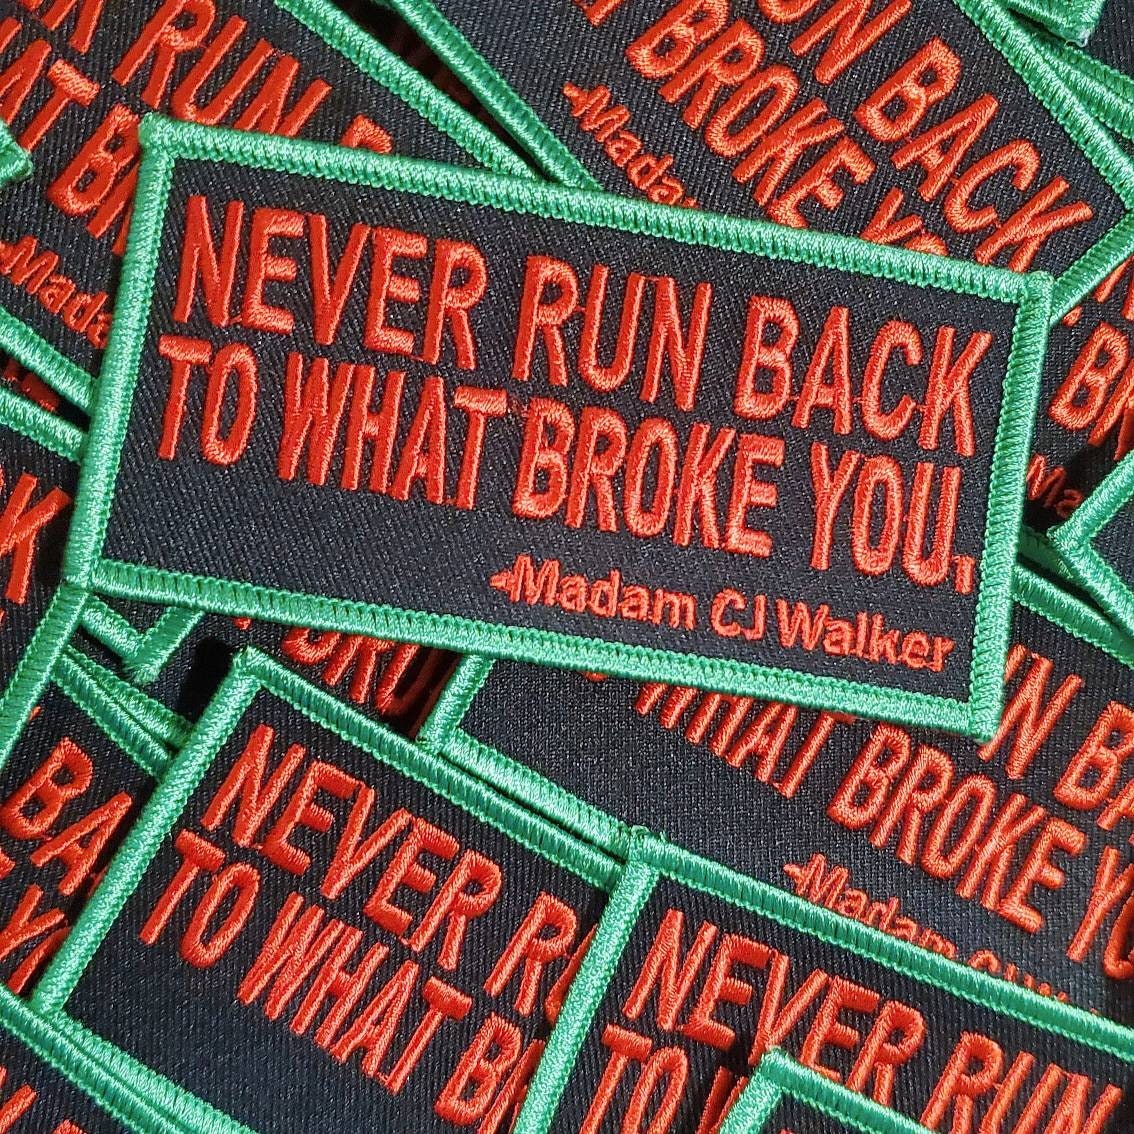 New Arrival,"Never Run Back to What Broke You" Madam CJ Walker Homage Badge, Iron-on Embroidered Patch, Craft Supplies, Small Patch, 3.75"